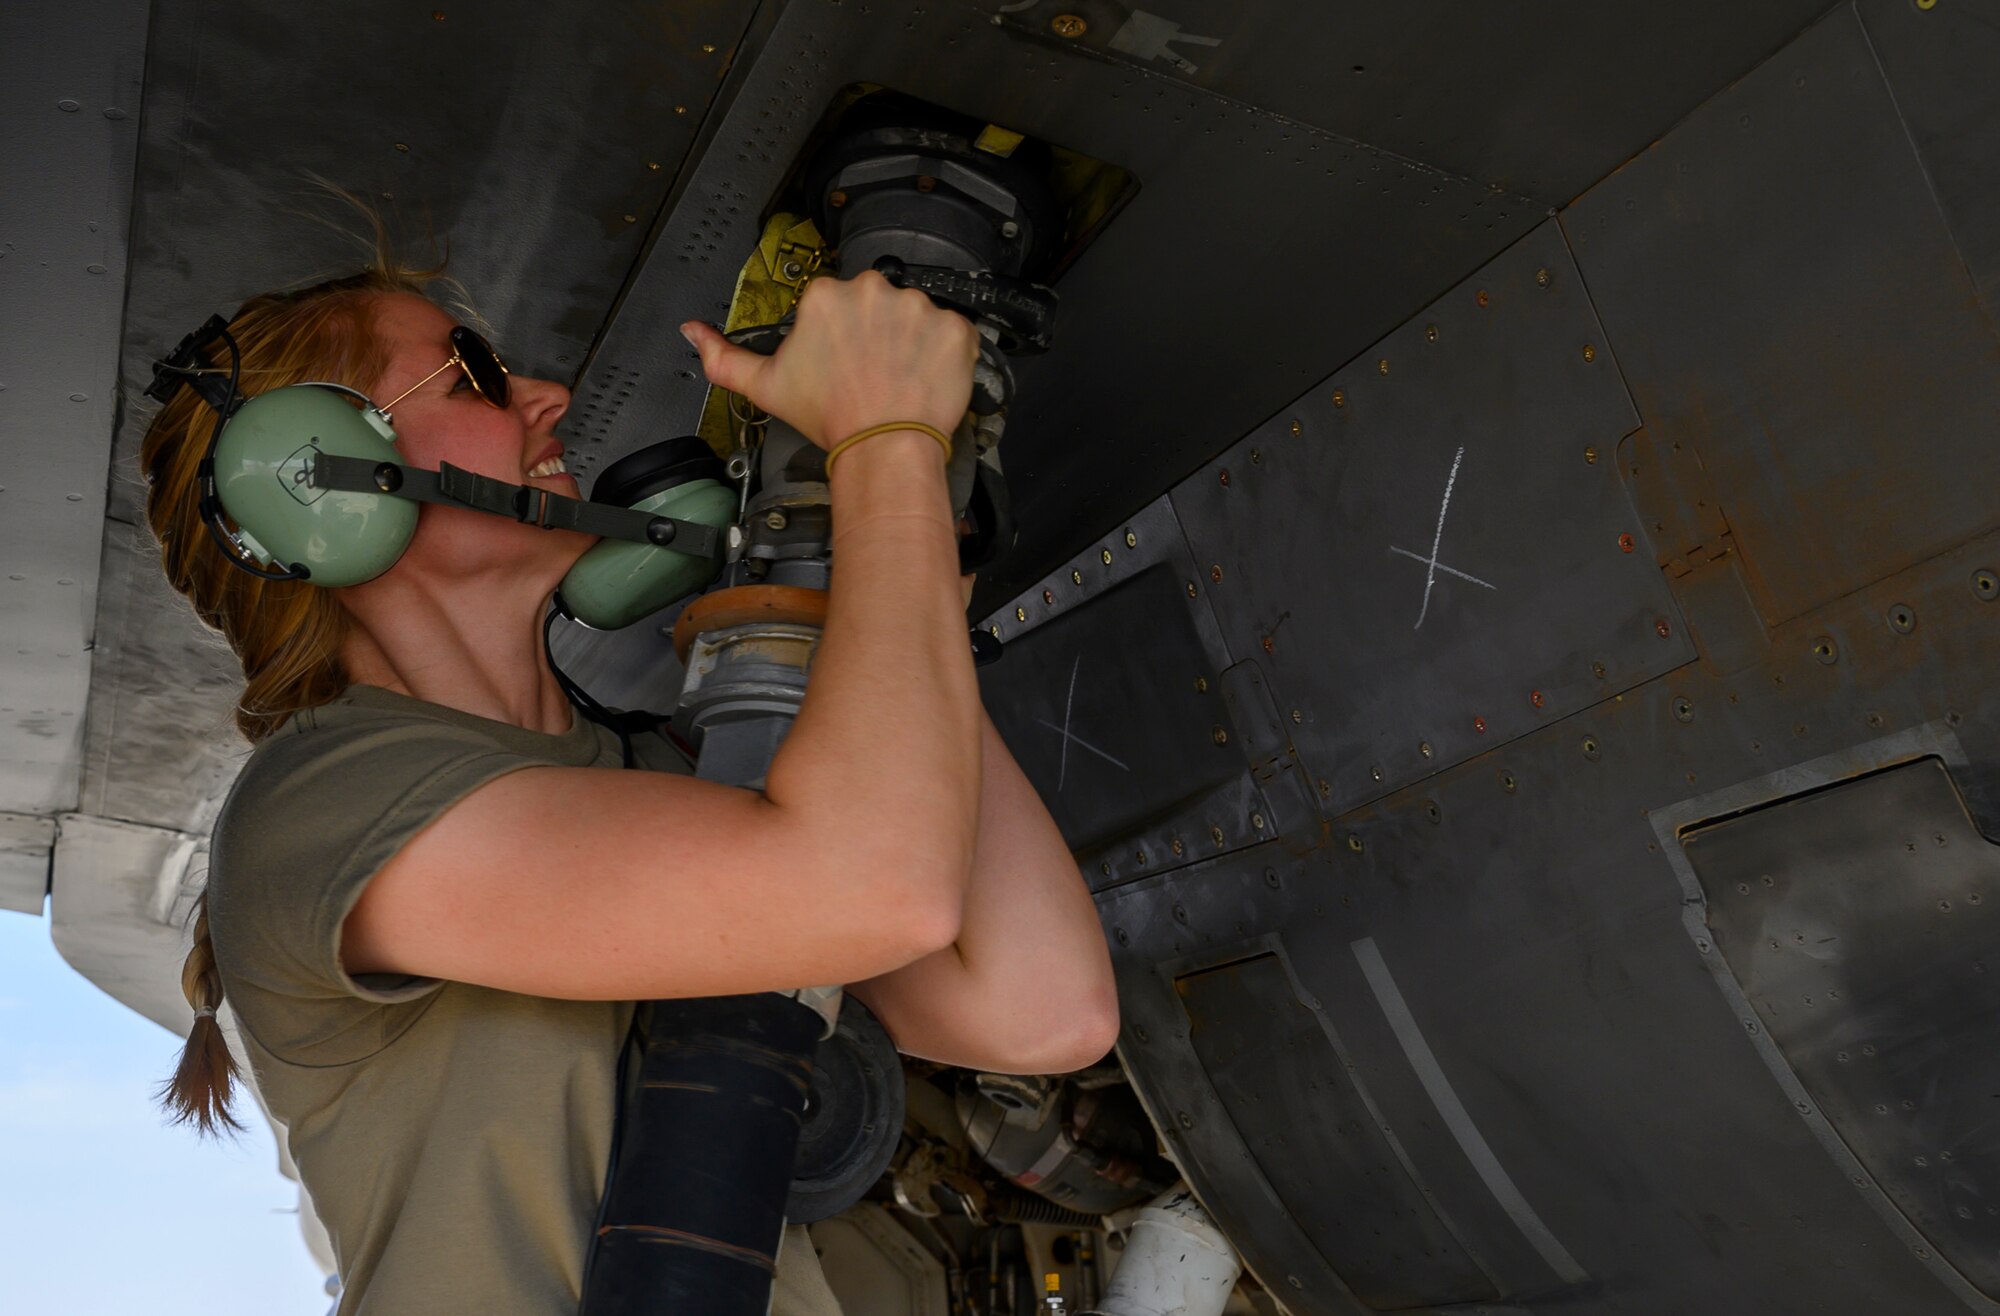 U.S. Air Force Staff Sgt. Rebecca Sumpter, 157th Expeditionary Fighter Generation Squadron weapons load crew, attaches the fuel hose to a U.S. Air Force Fighting Falcon F-16 during a counter unmanned aerial system integration mission with joint and Royal Saudi aircraft at a forward location in the Kingdom of Saudi Arabia, June 30, 2021. U.S. Air Forces Central aircraft regularly work with coalition and partner nations to test their collective counter-UAS capabilities to ensure the security and stability of regional airspace. (U.S. Air Force photo by Senior Airman Samuel Earick)